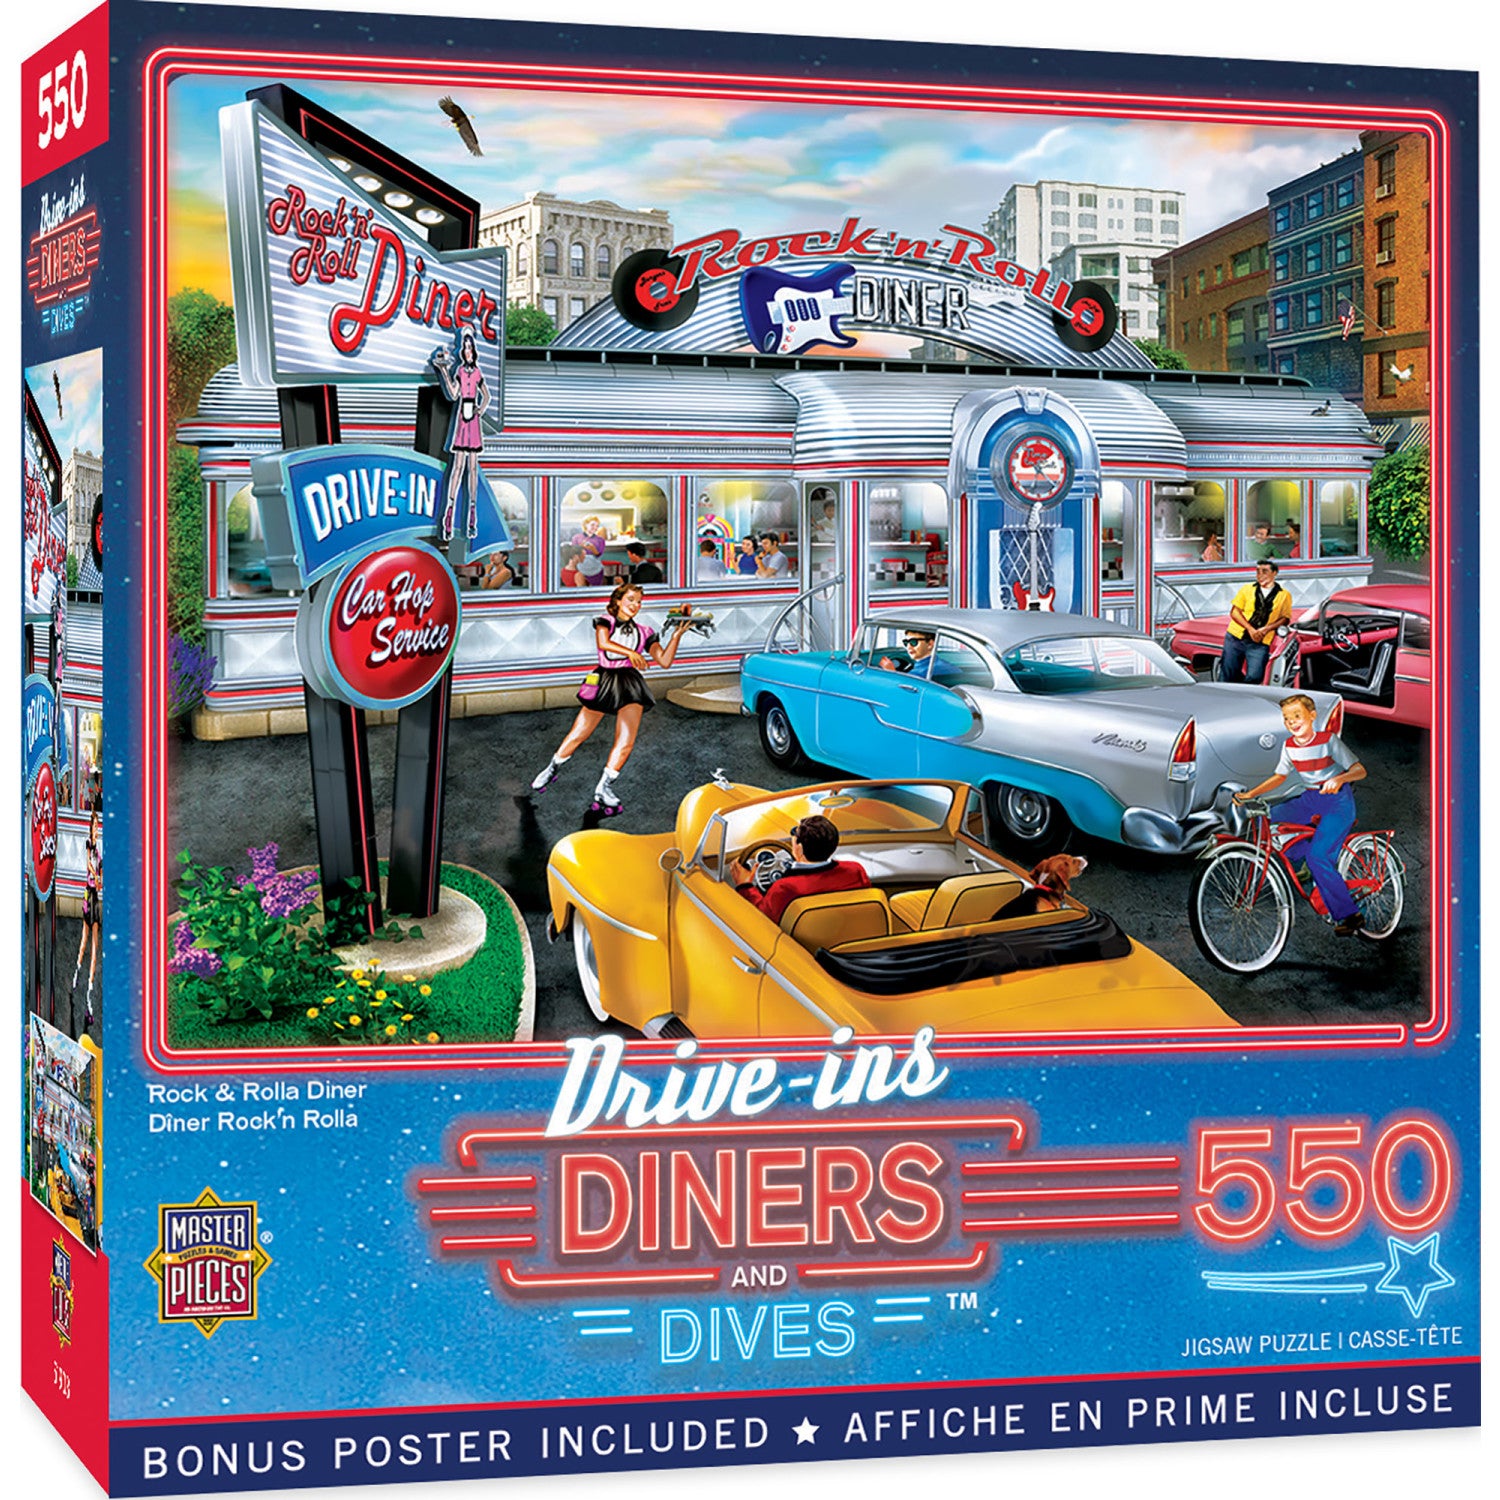 Drive-Ins, Diners & Dives - Rock & Rolla Diner 550 Piece Jigsaw Puzzle